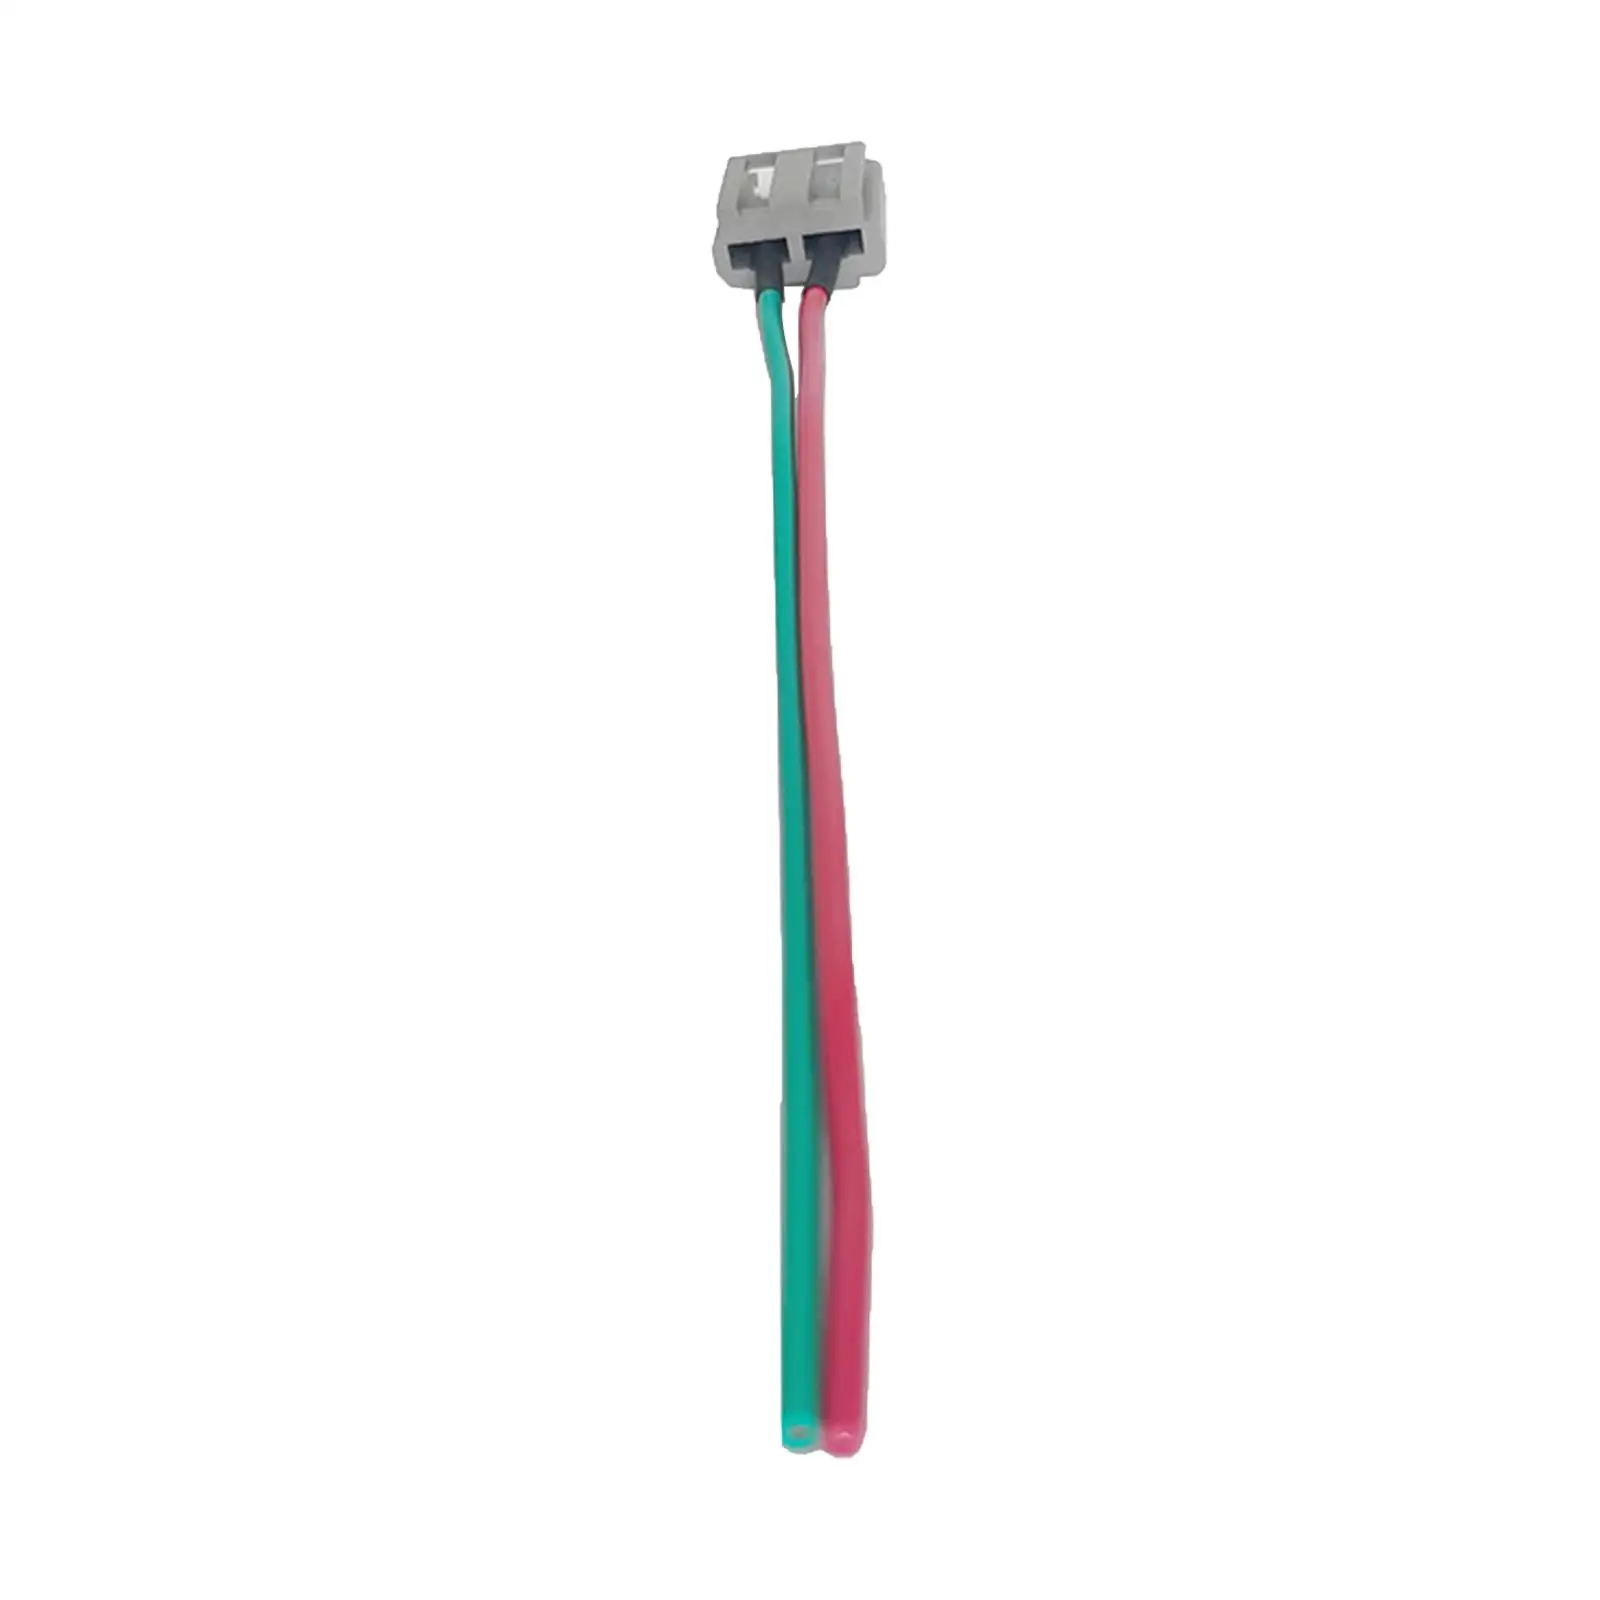 Hei Wire Harness Connector 12 Supplies Interior Hei Distributor Fits for 170072, Accessories ,Replacement